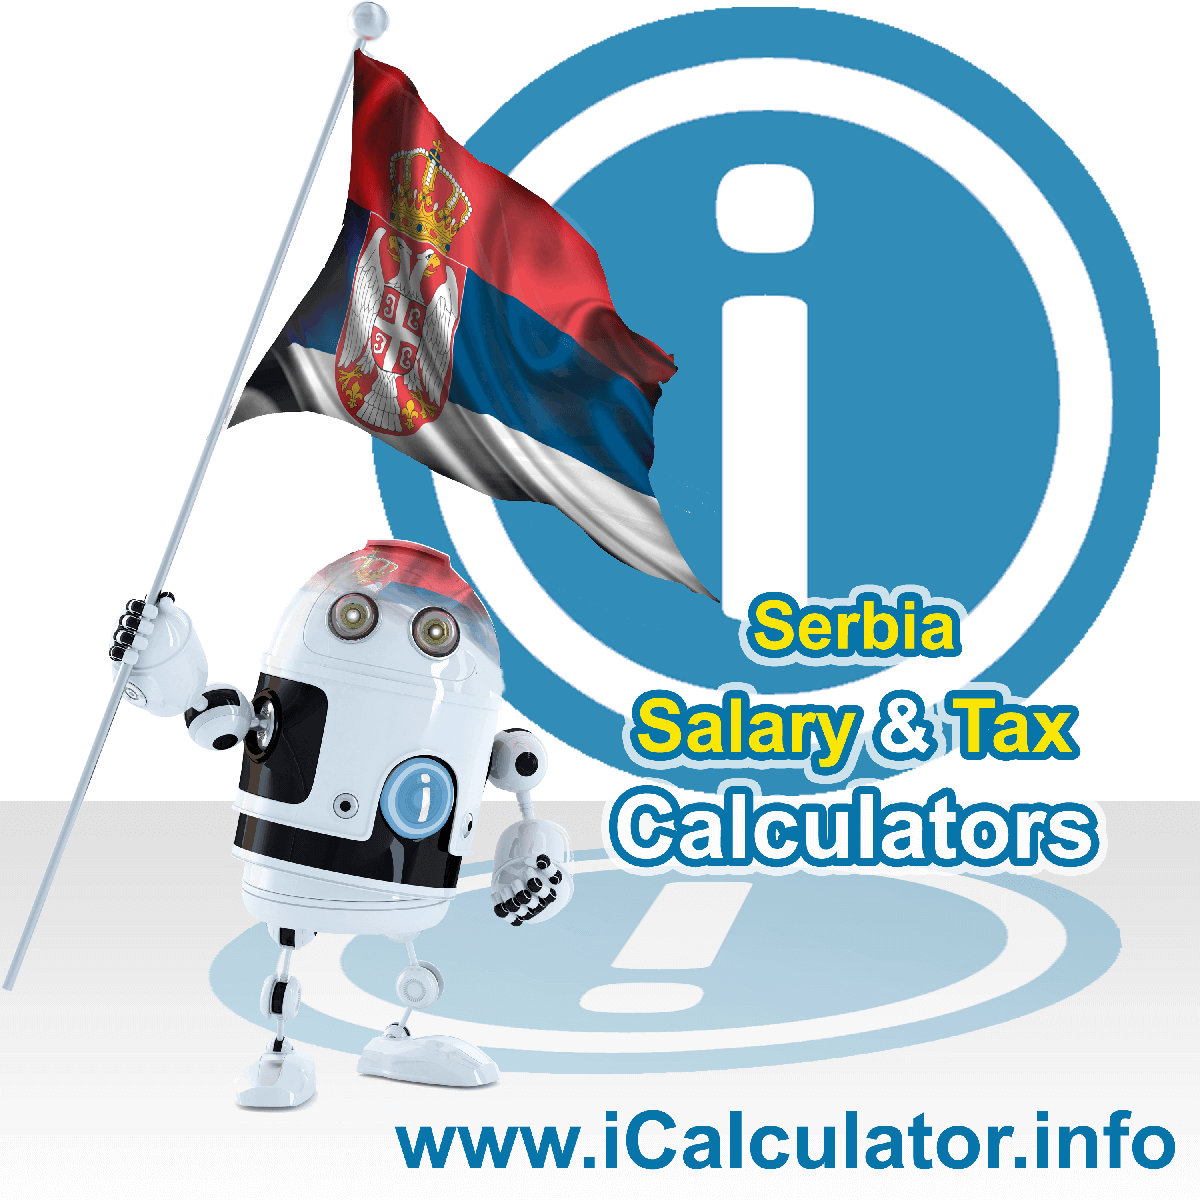 Serbia Salary Calculator. This image shows the Serbiaese flag and information relating to the tax formula for the Serbia Tax Calculator